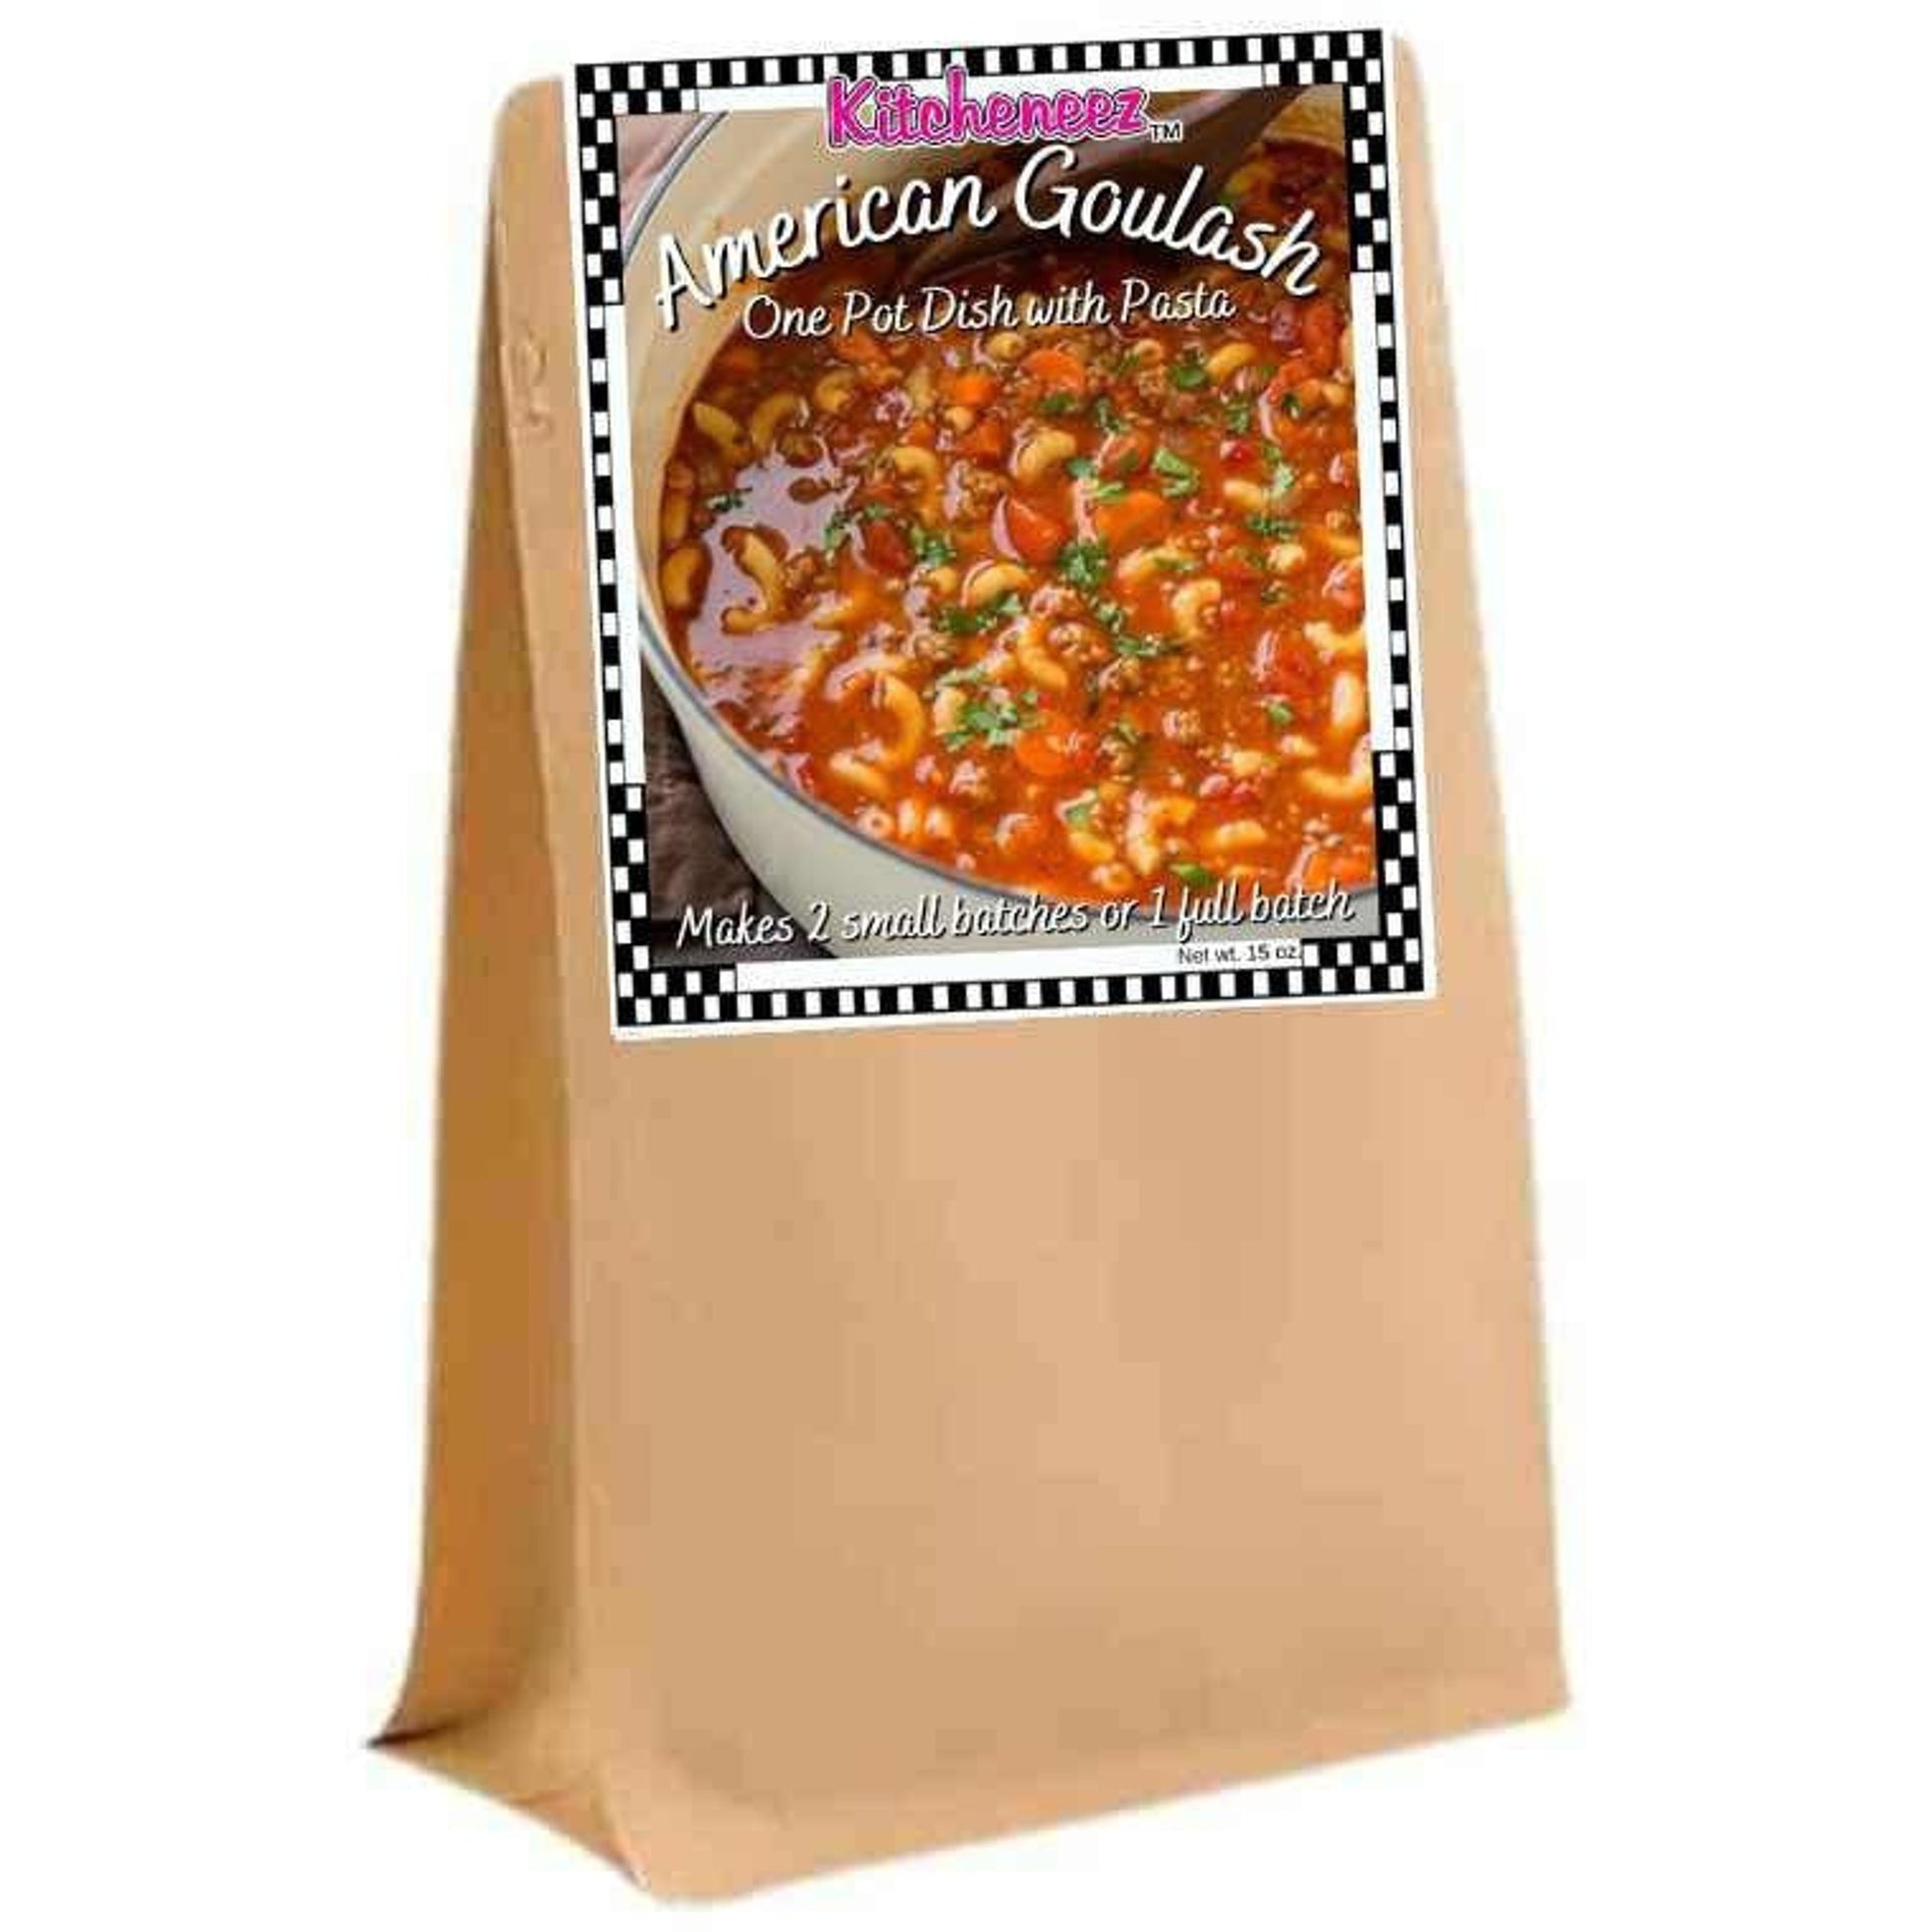 American Goulash One Pot Dish with pasta included - Kitcheneez Mixes & More!